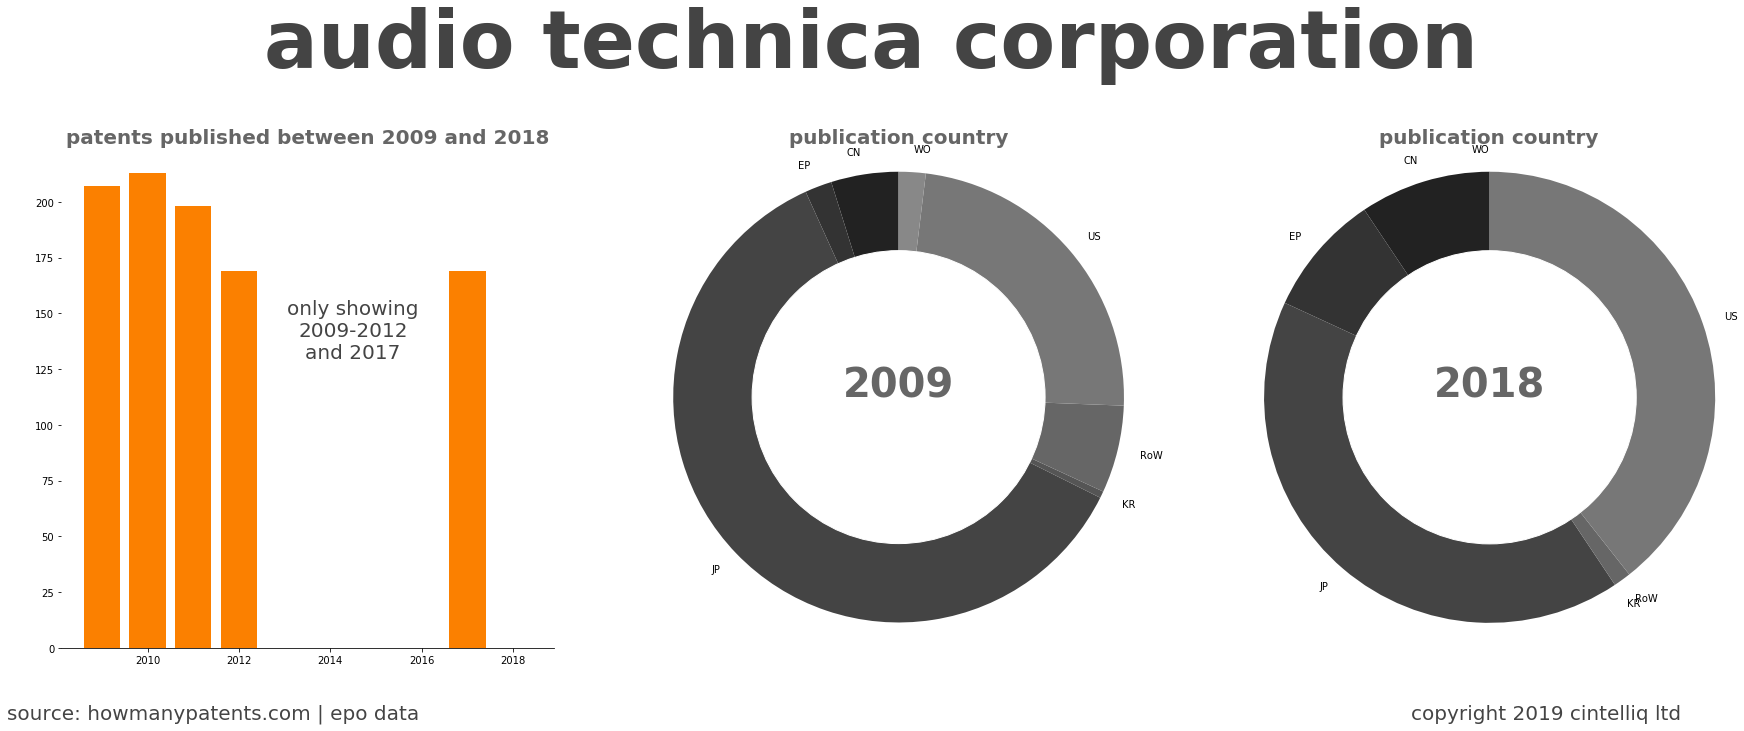 summary of patents for Audio Technica Corporation